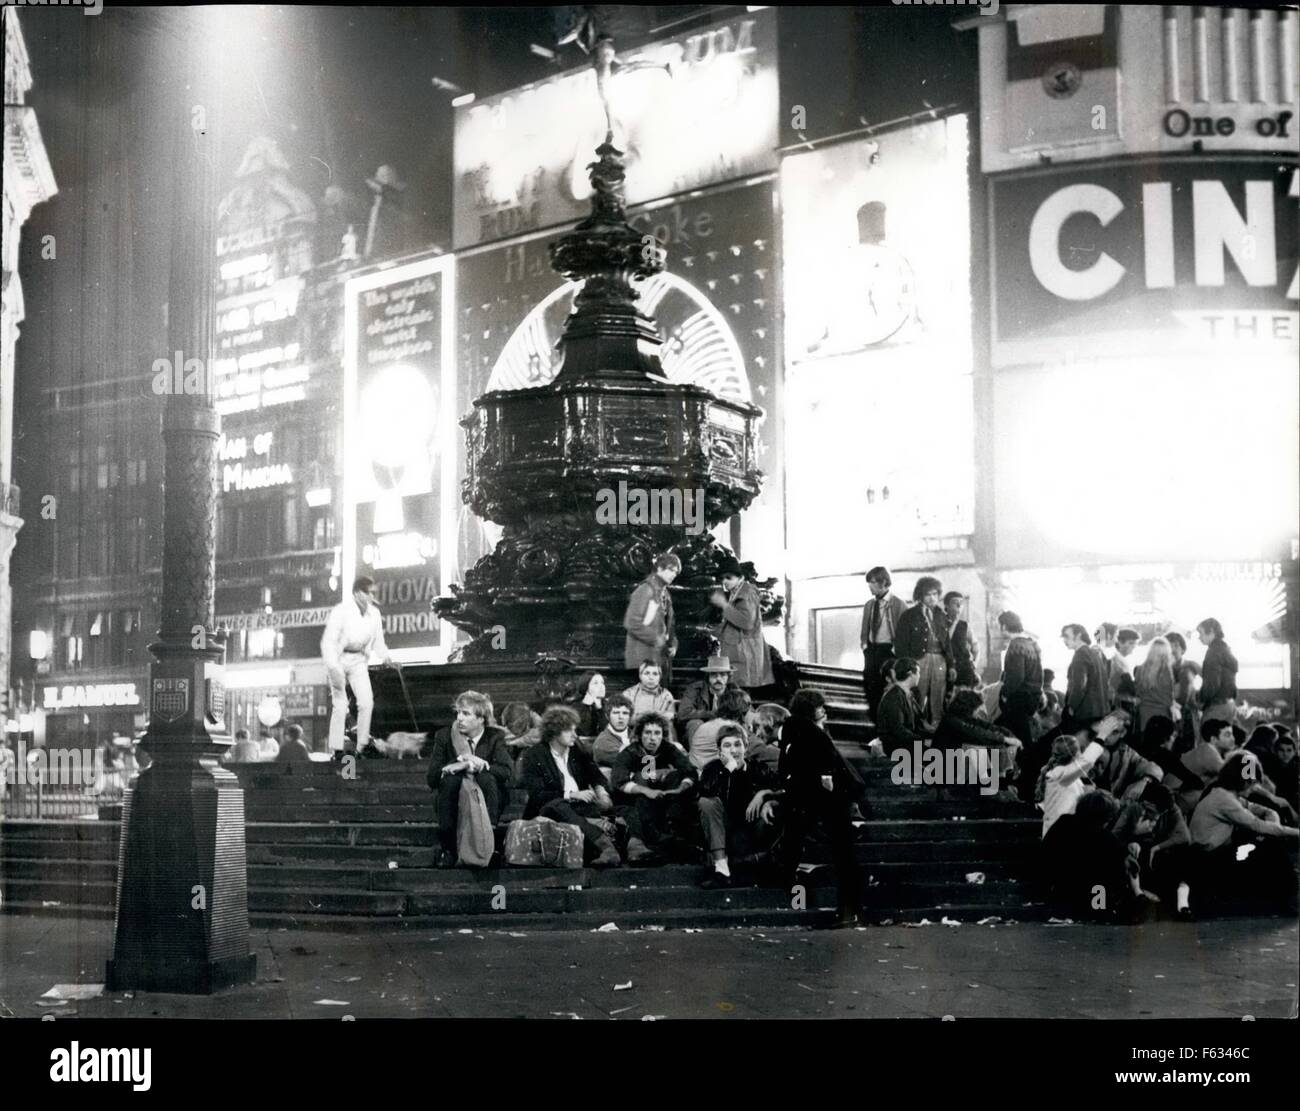 1968 - Is London Becoming Shameful? Piccadilly, Green Park, Leicester Square - places for London to be proud of, For those are the places that have been virtually taken over by crowds of hippies, beatniks and dropouts. Day and night they are to be found littering ''Eros Island'' - the area surrounding the Eros Statue, London's most famous landmark, at Piccadilly Circus. Lounging around the steps and pavements they will spend the entire day there, young people from all over the world, until the police move them on - generally to what has become a shanty town - Green Park, Residents of the Green Stock Photo